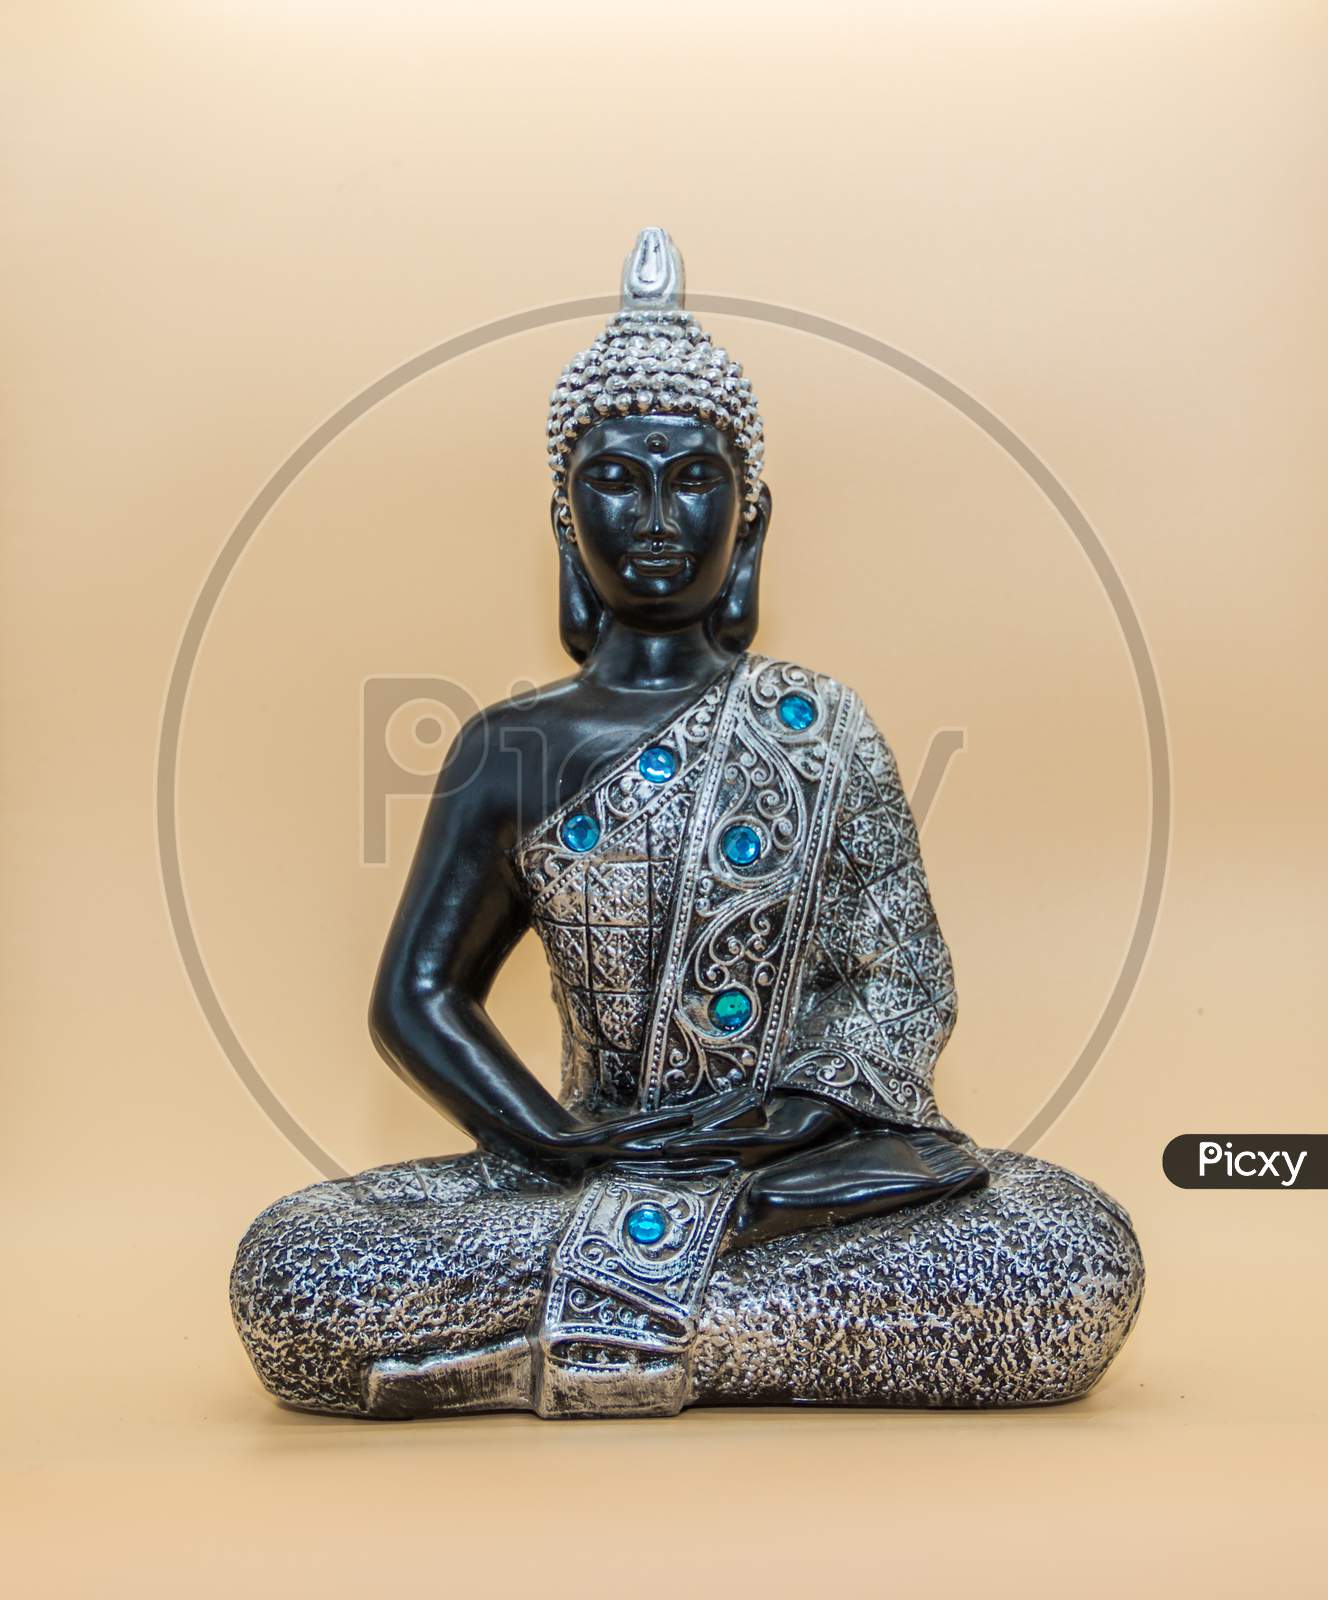 A Small Image Of Buddha In Lotus Position Isolated On Light Background